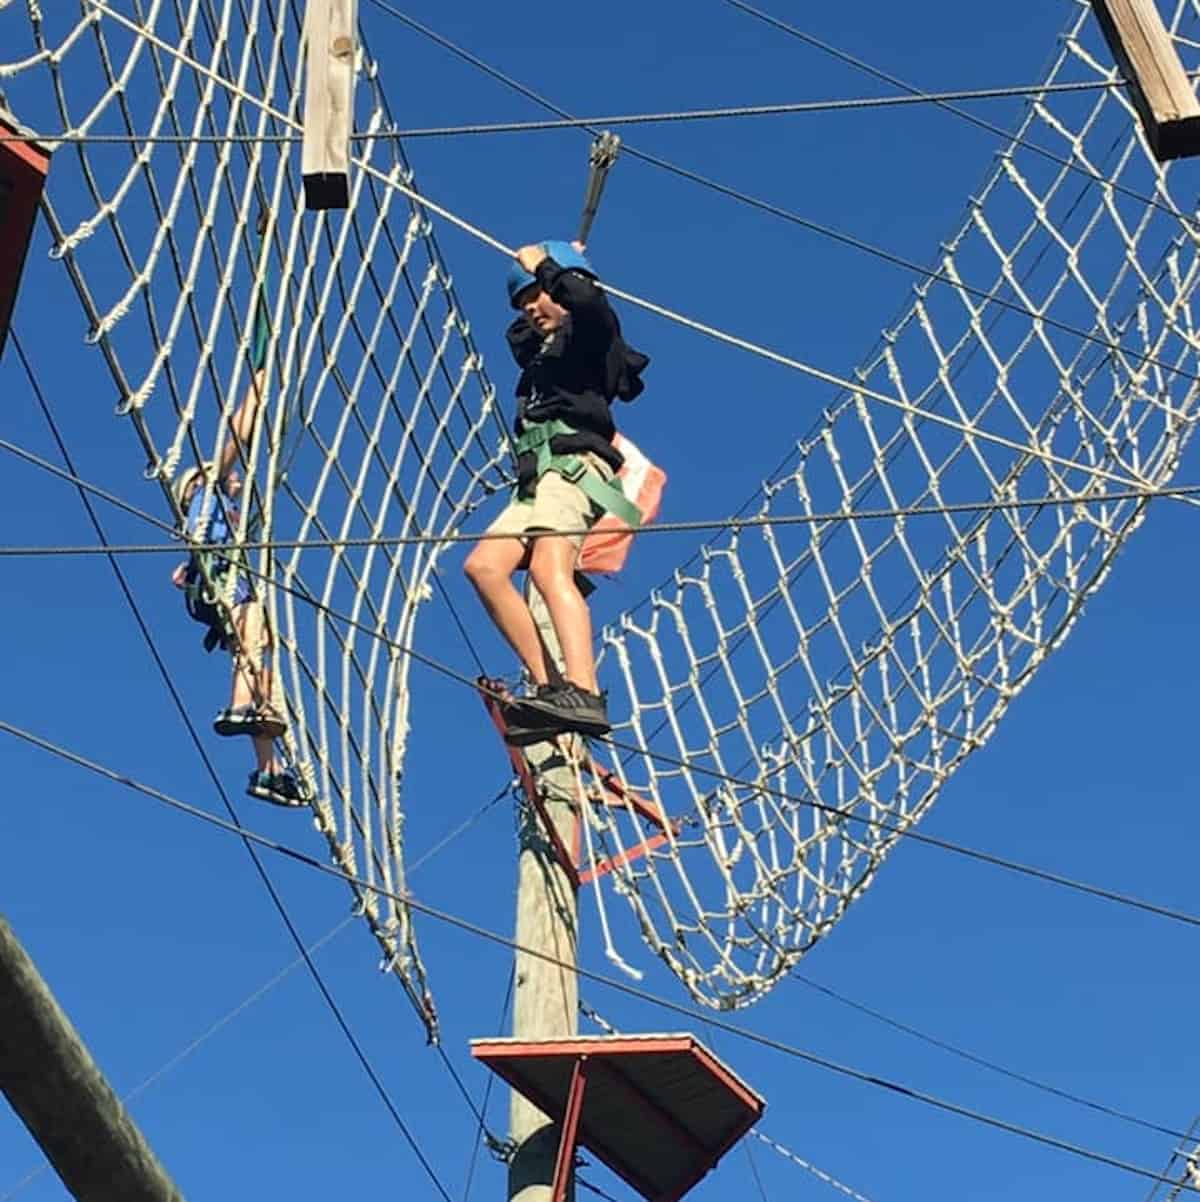 Rainard School for Gifted Children Ropes Course